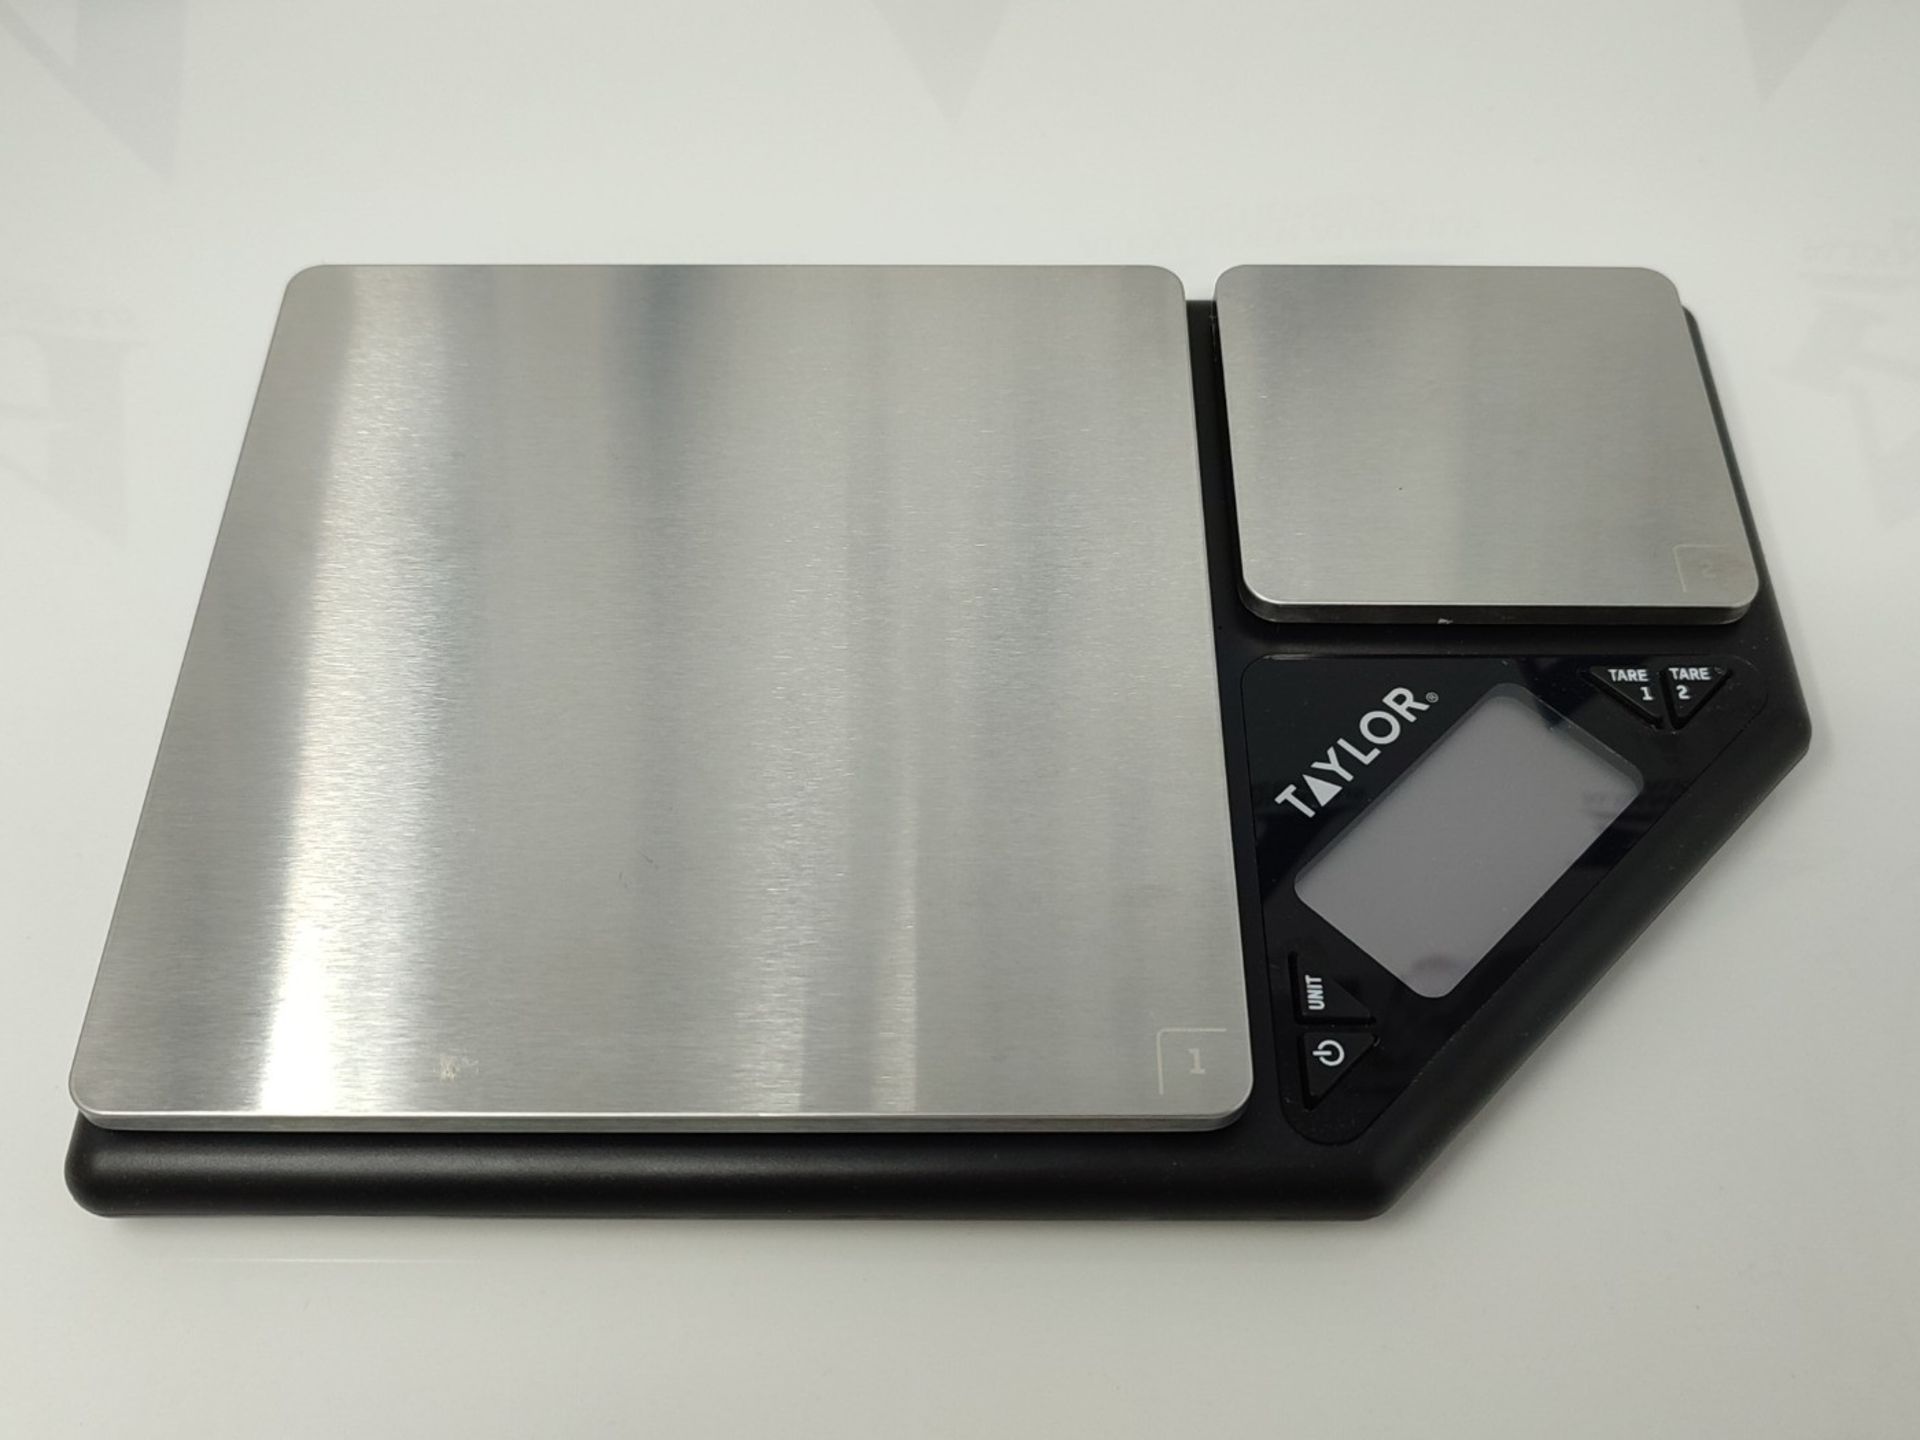 Taylor Pro Digital Kitchen Food Scales with Dual Platform Weighing Design, Professiona - Image 2 of 2